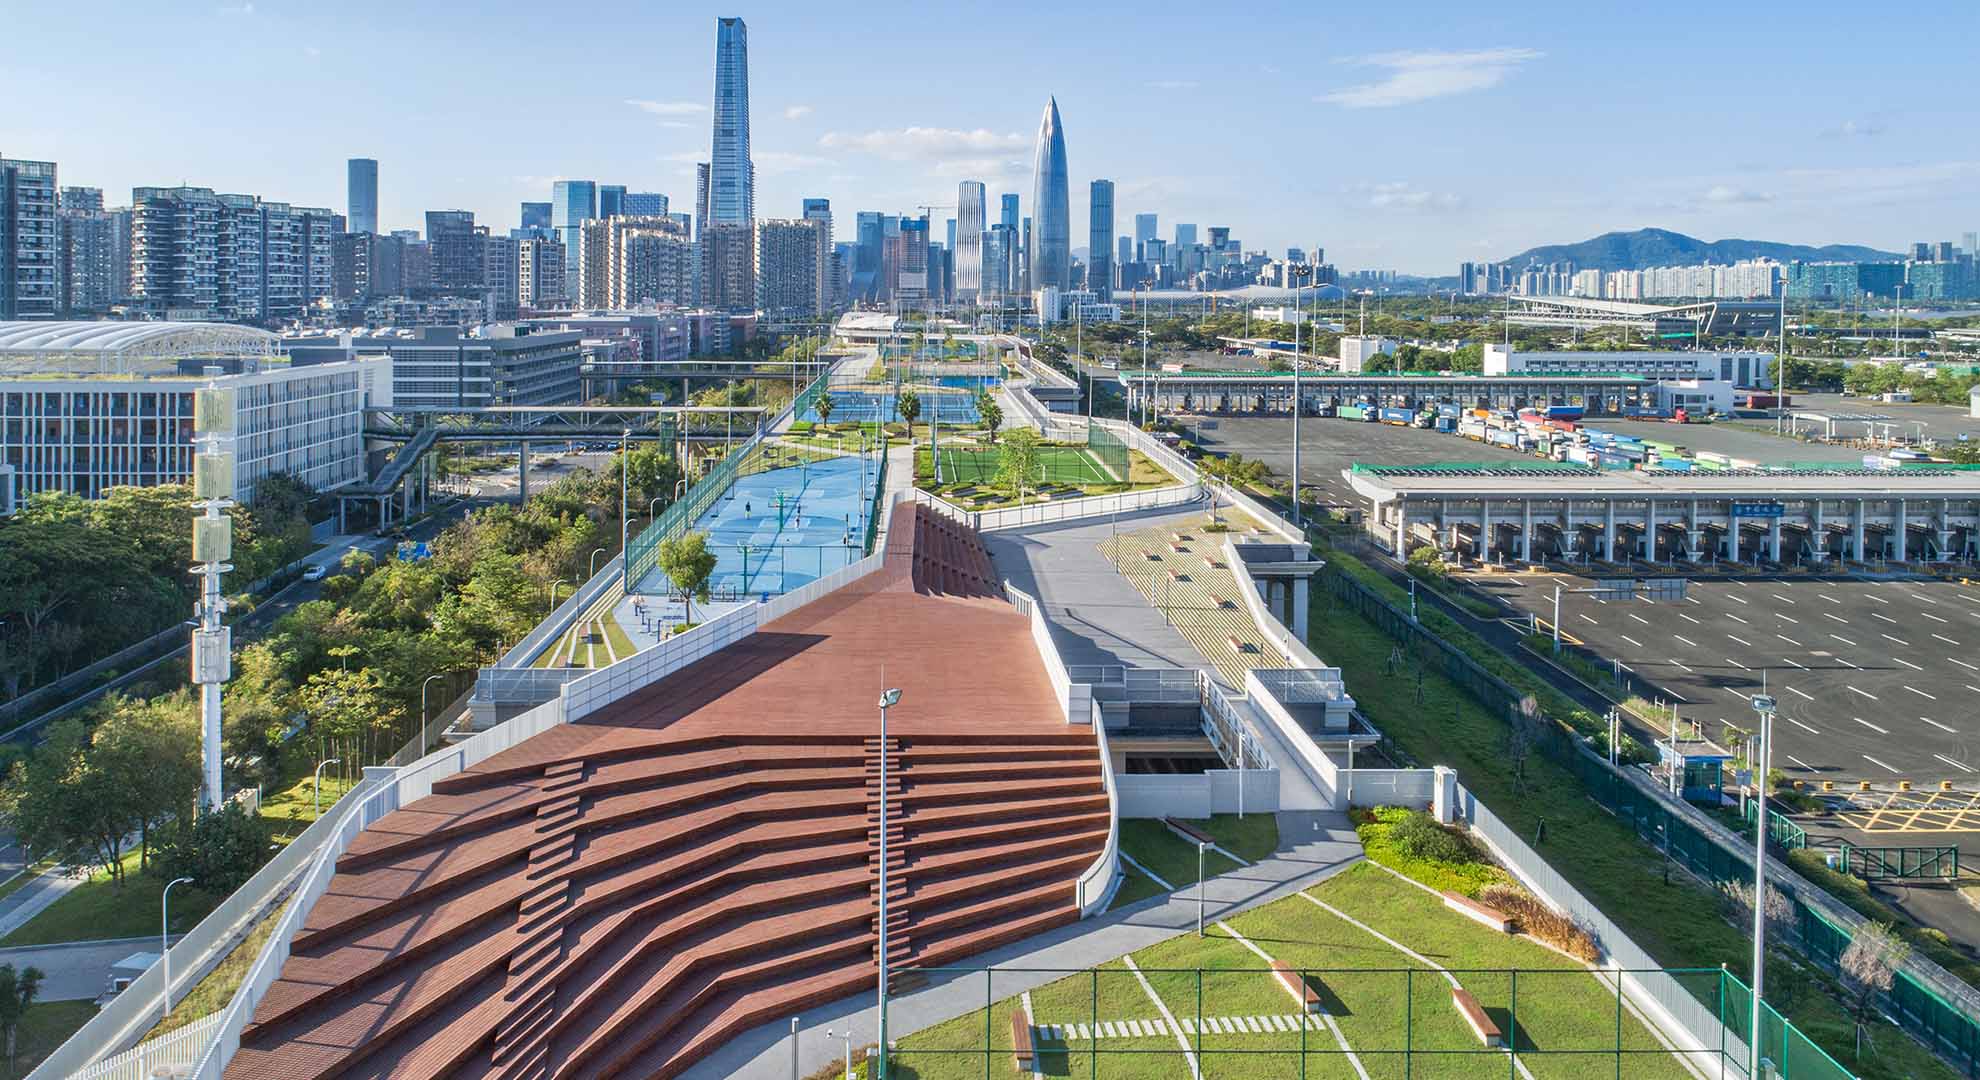 Infrastructures such as this park in China can be connecting spaces.